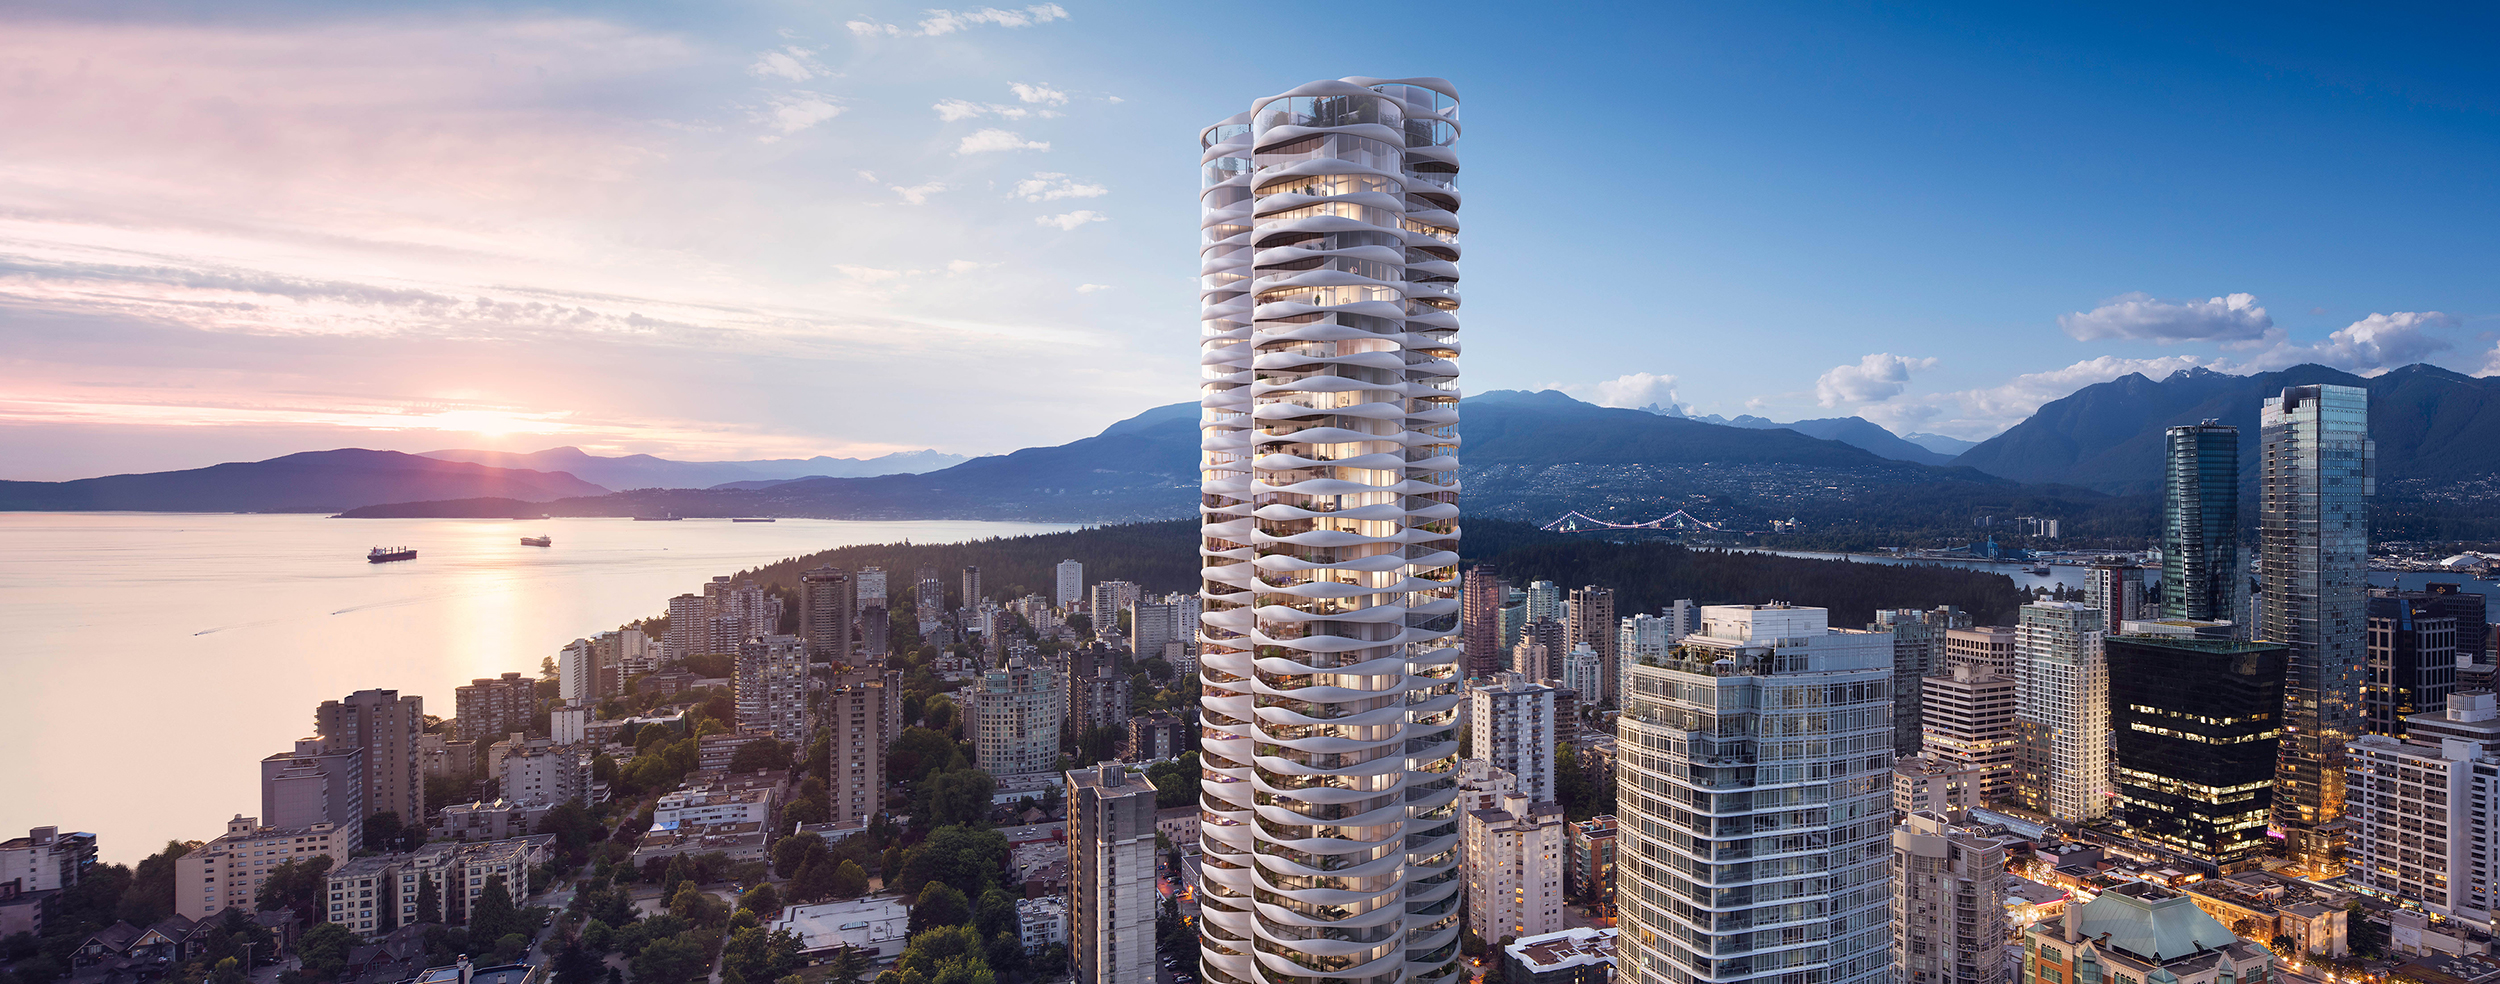 The Butterfly by Westbank, New Condo Development in Vancouver